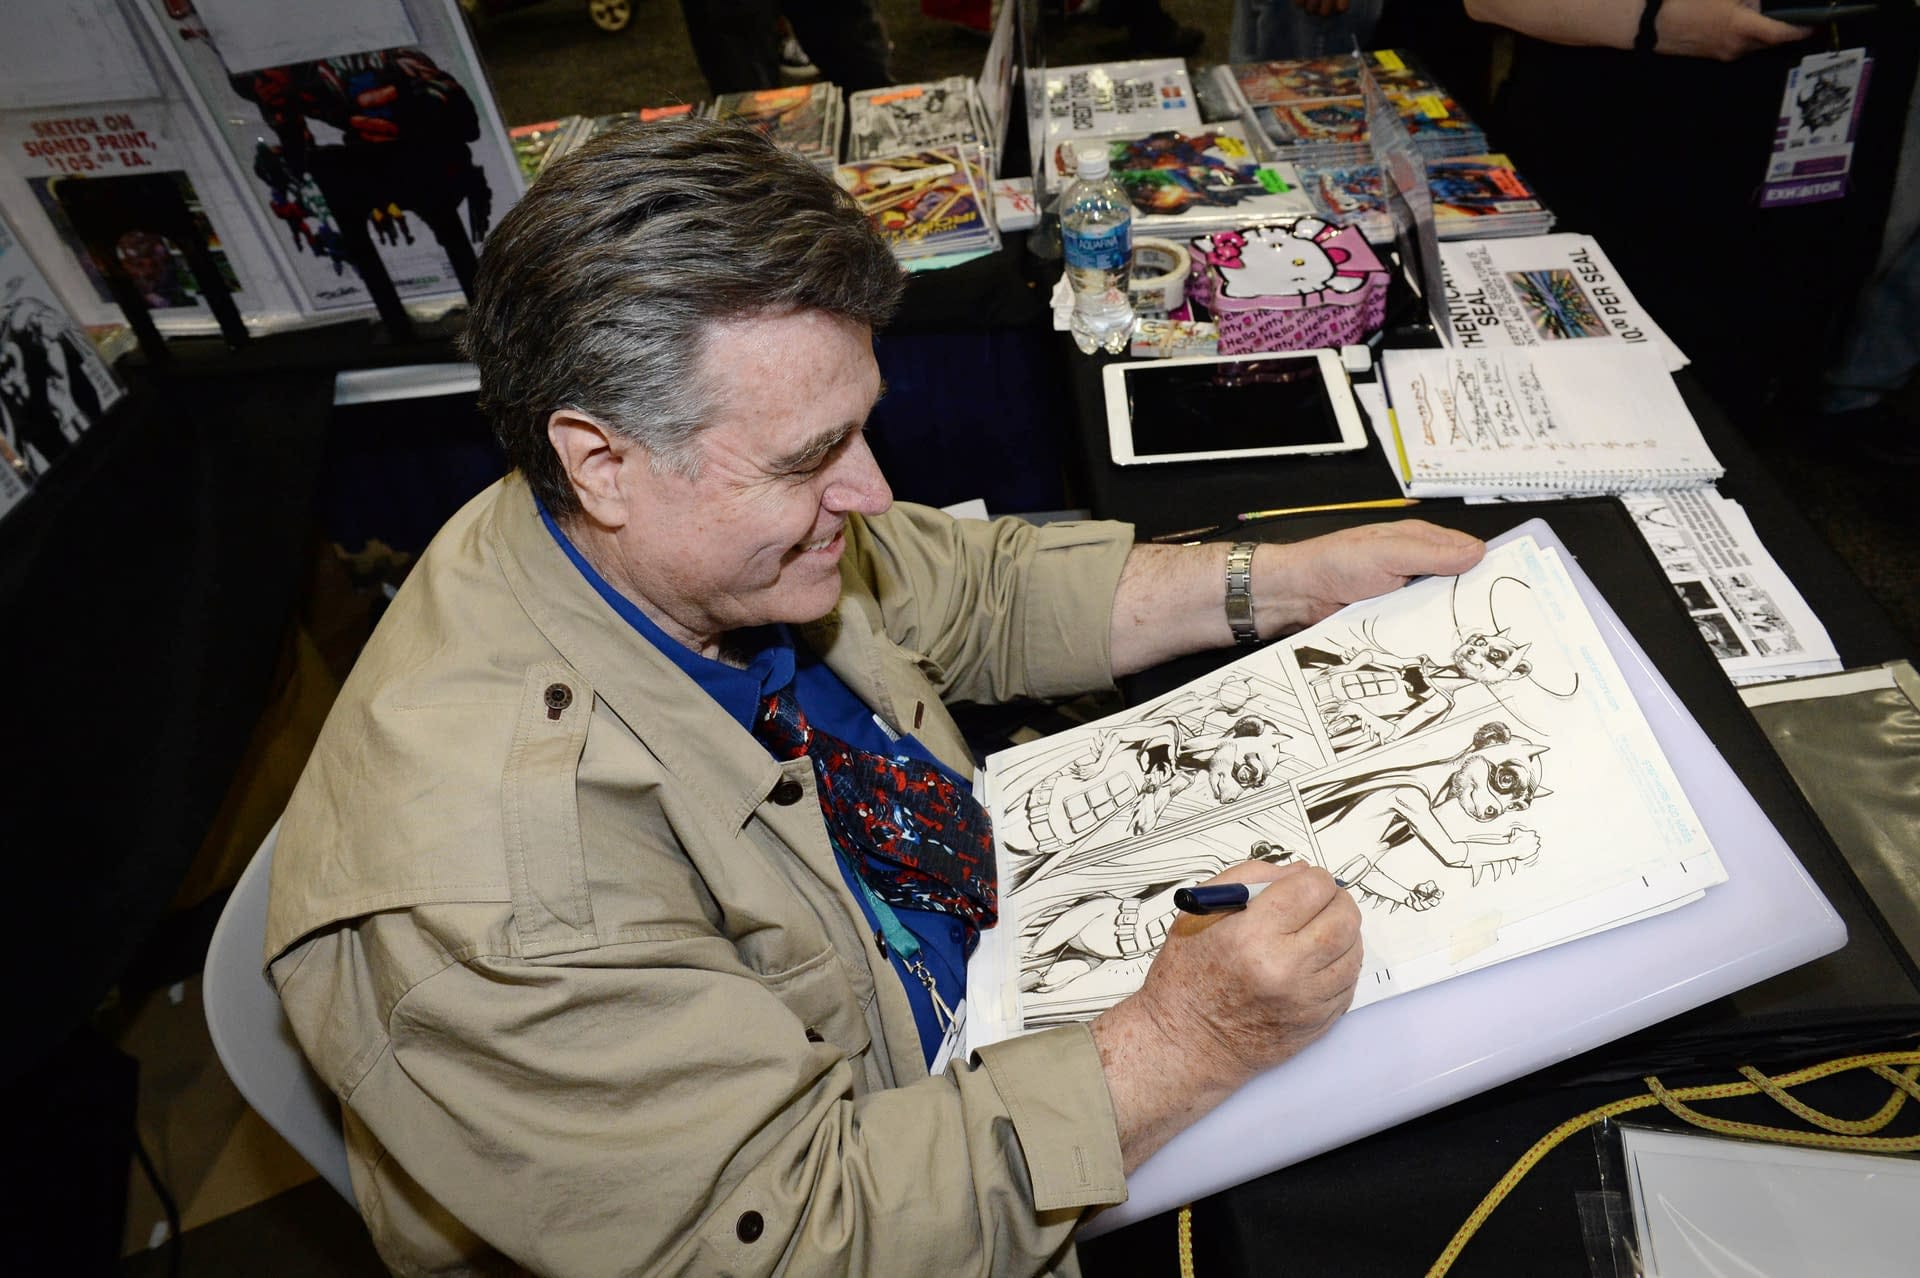 Neal Adams The Comic Artist Dies @ 80 Years Old- Death Cause: Meet Wife And Family 